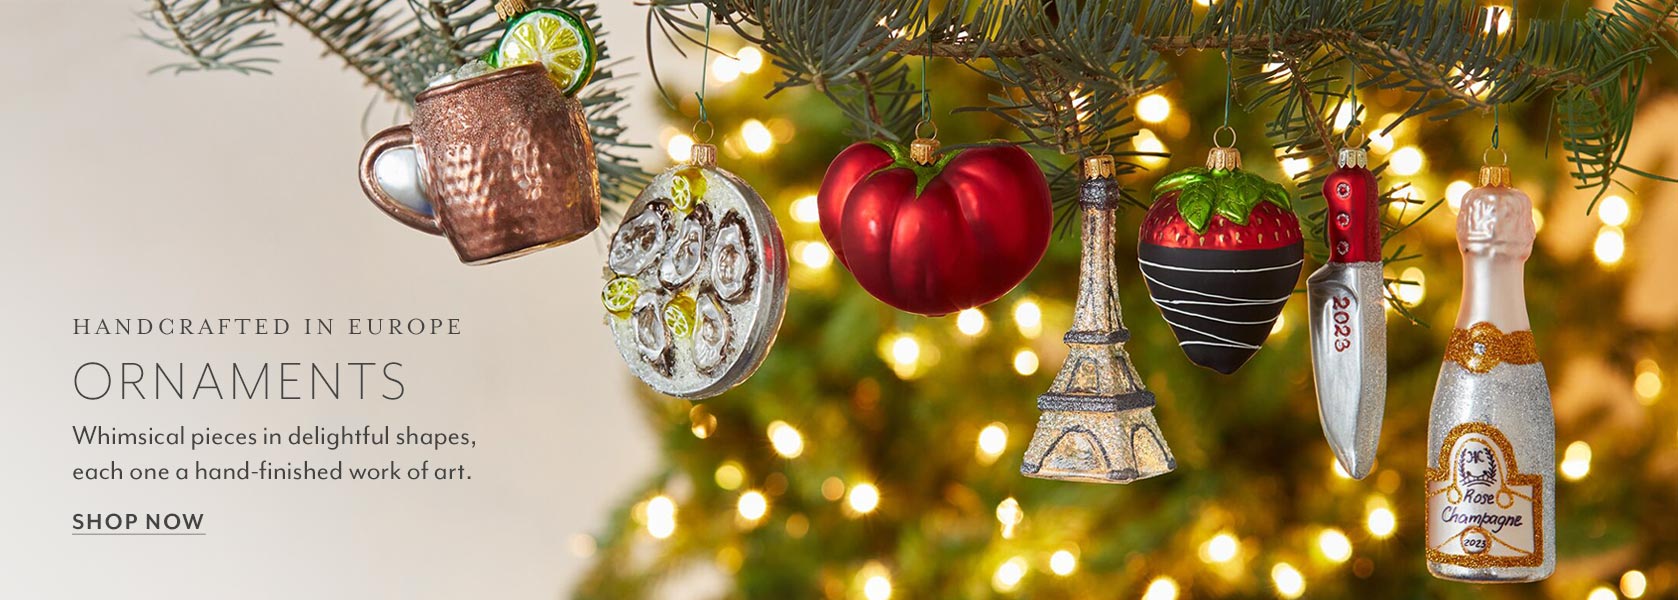 Handcrafted in Europe Ornaments. Whimsical pieces in delightful shapes, each one a hand-finished work of art.